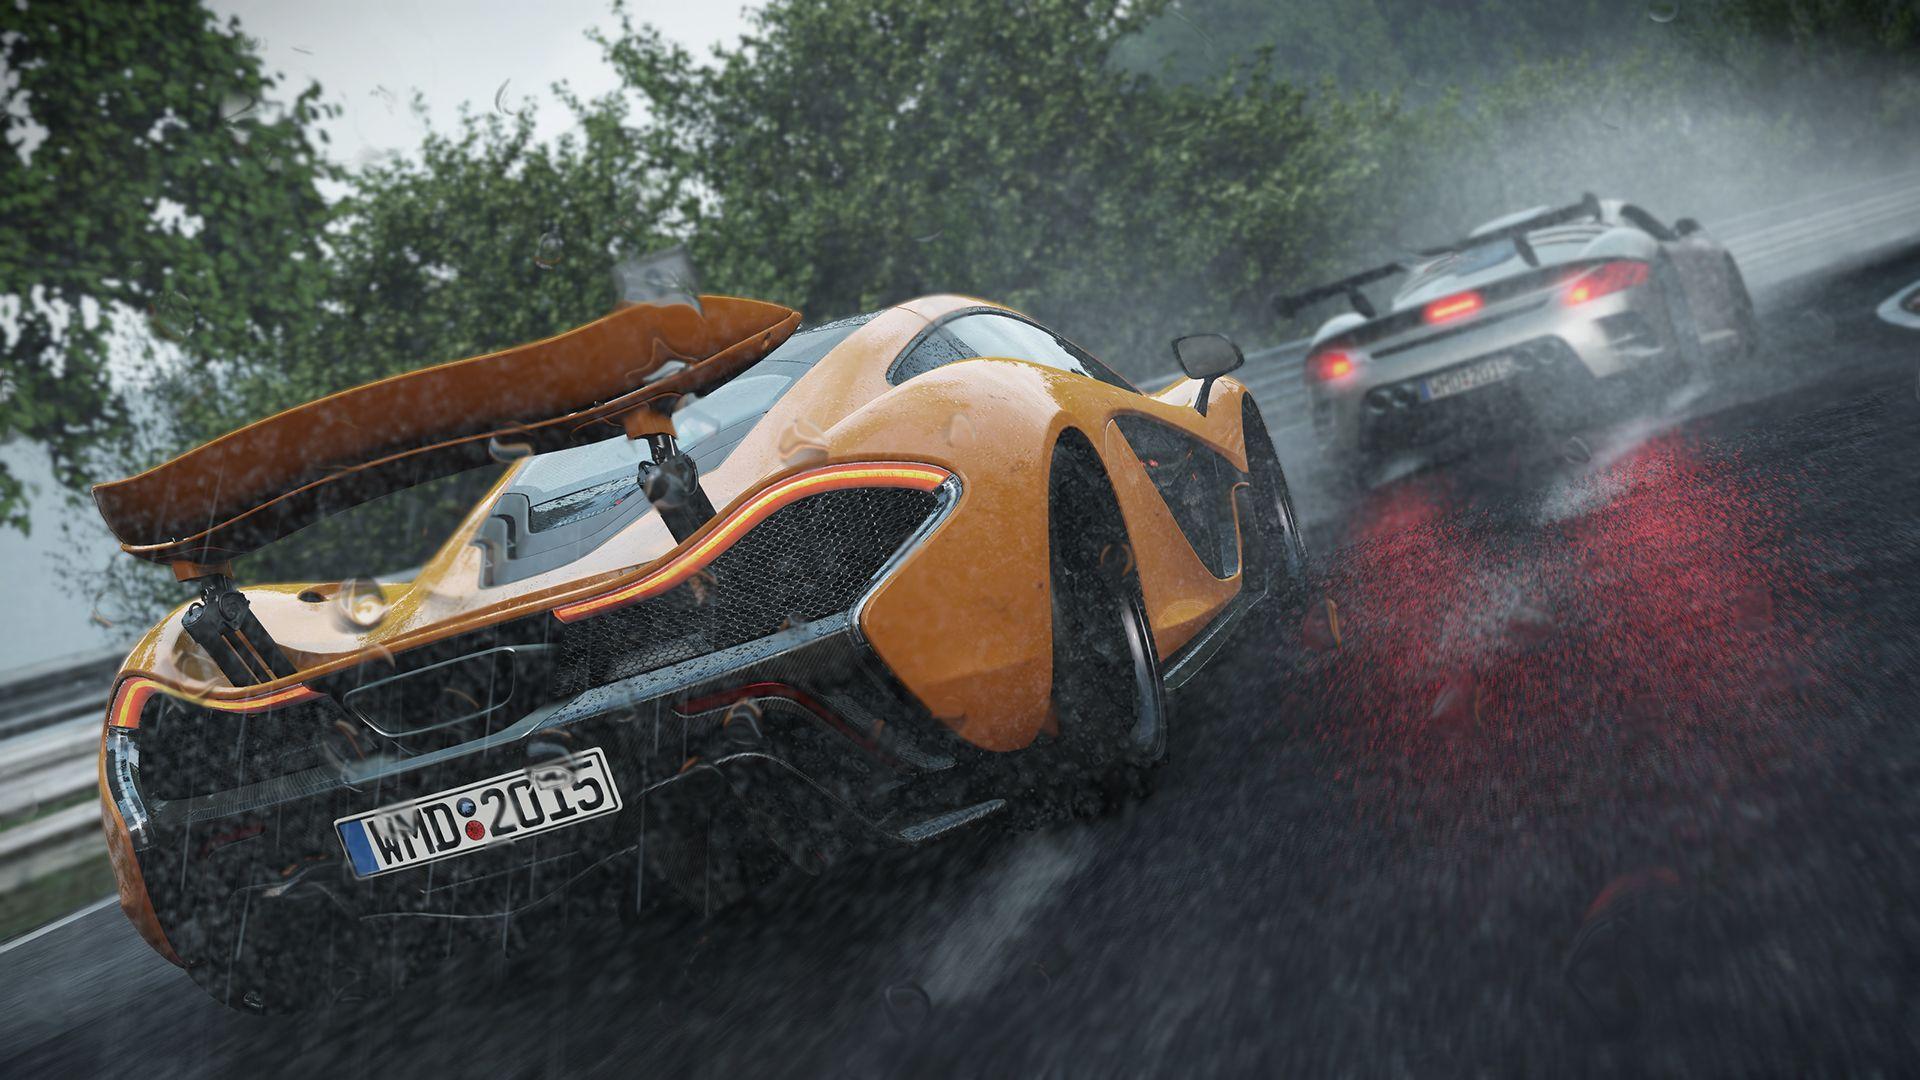 Project CARS 2 Targeting Septemberish Release, Says Ian Bell